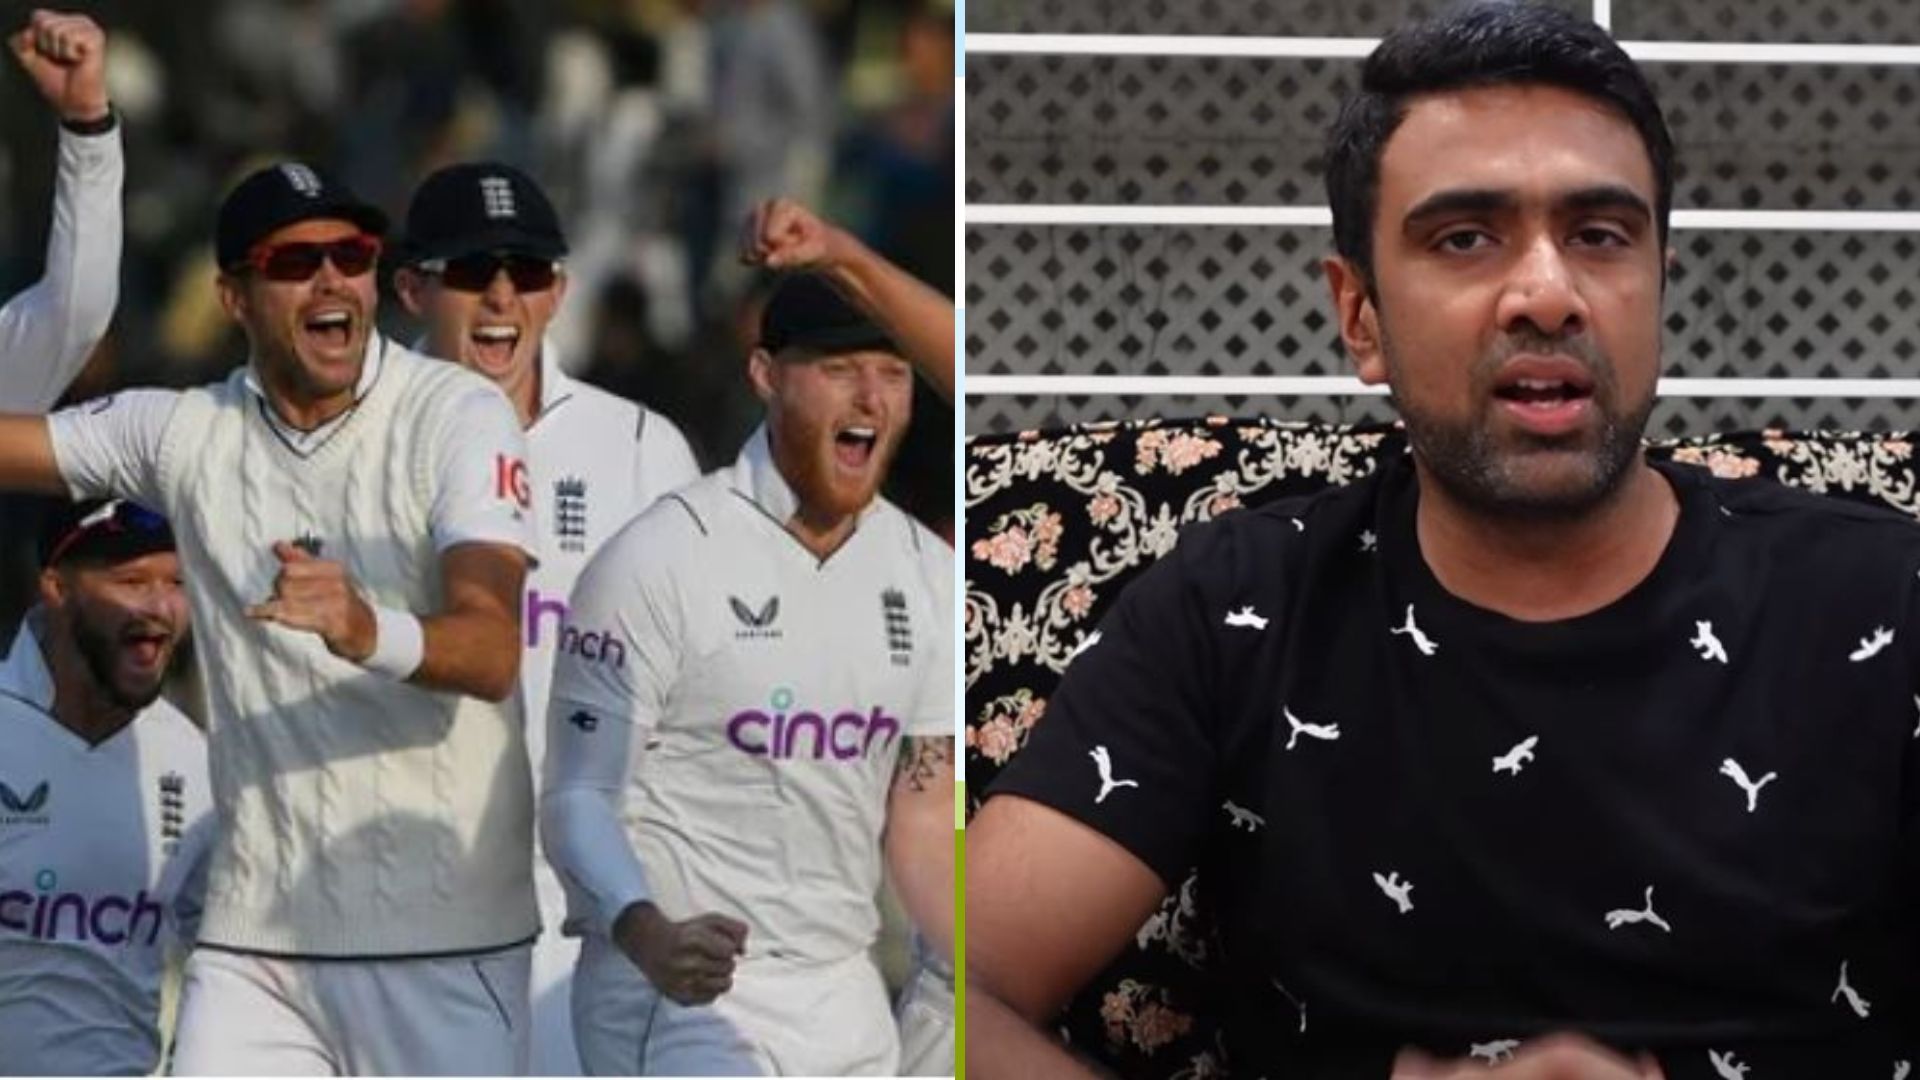 Ravichandran Ashwin lauded England for their approach but was unsure they can do it consistently